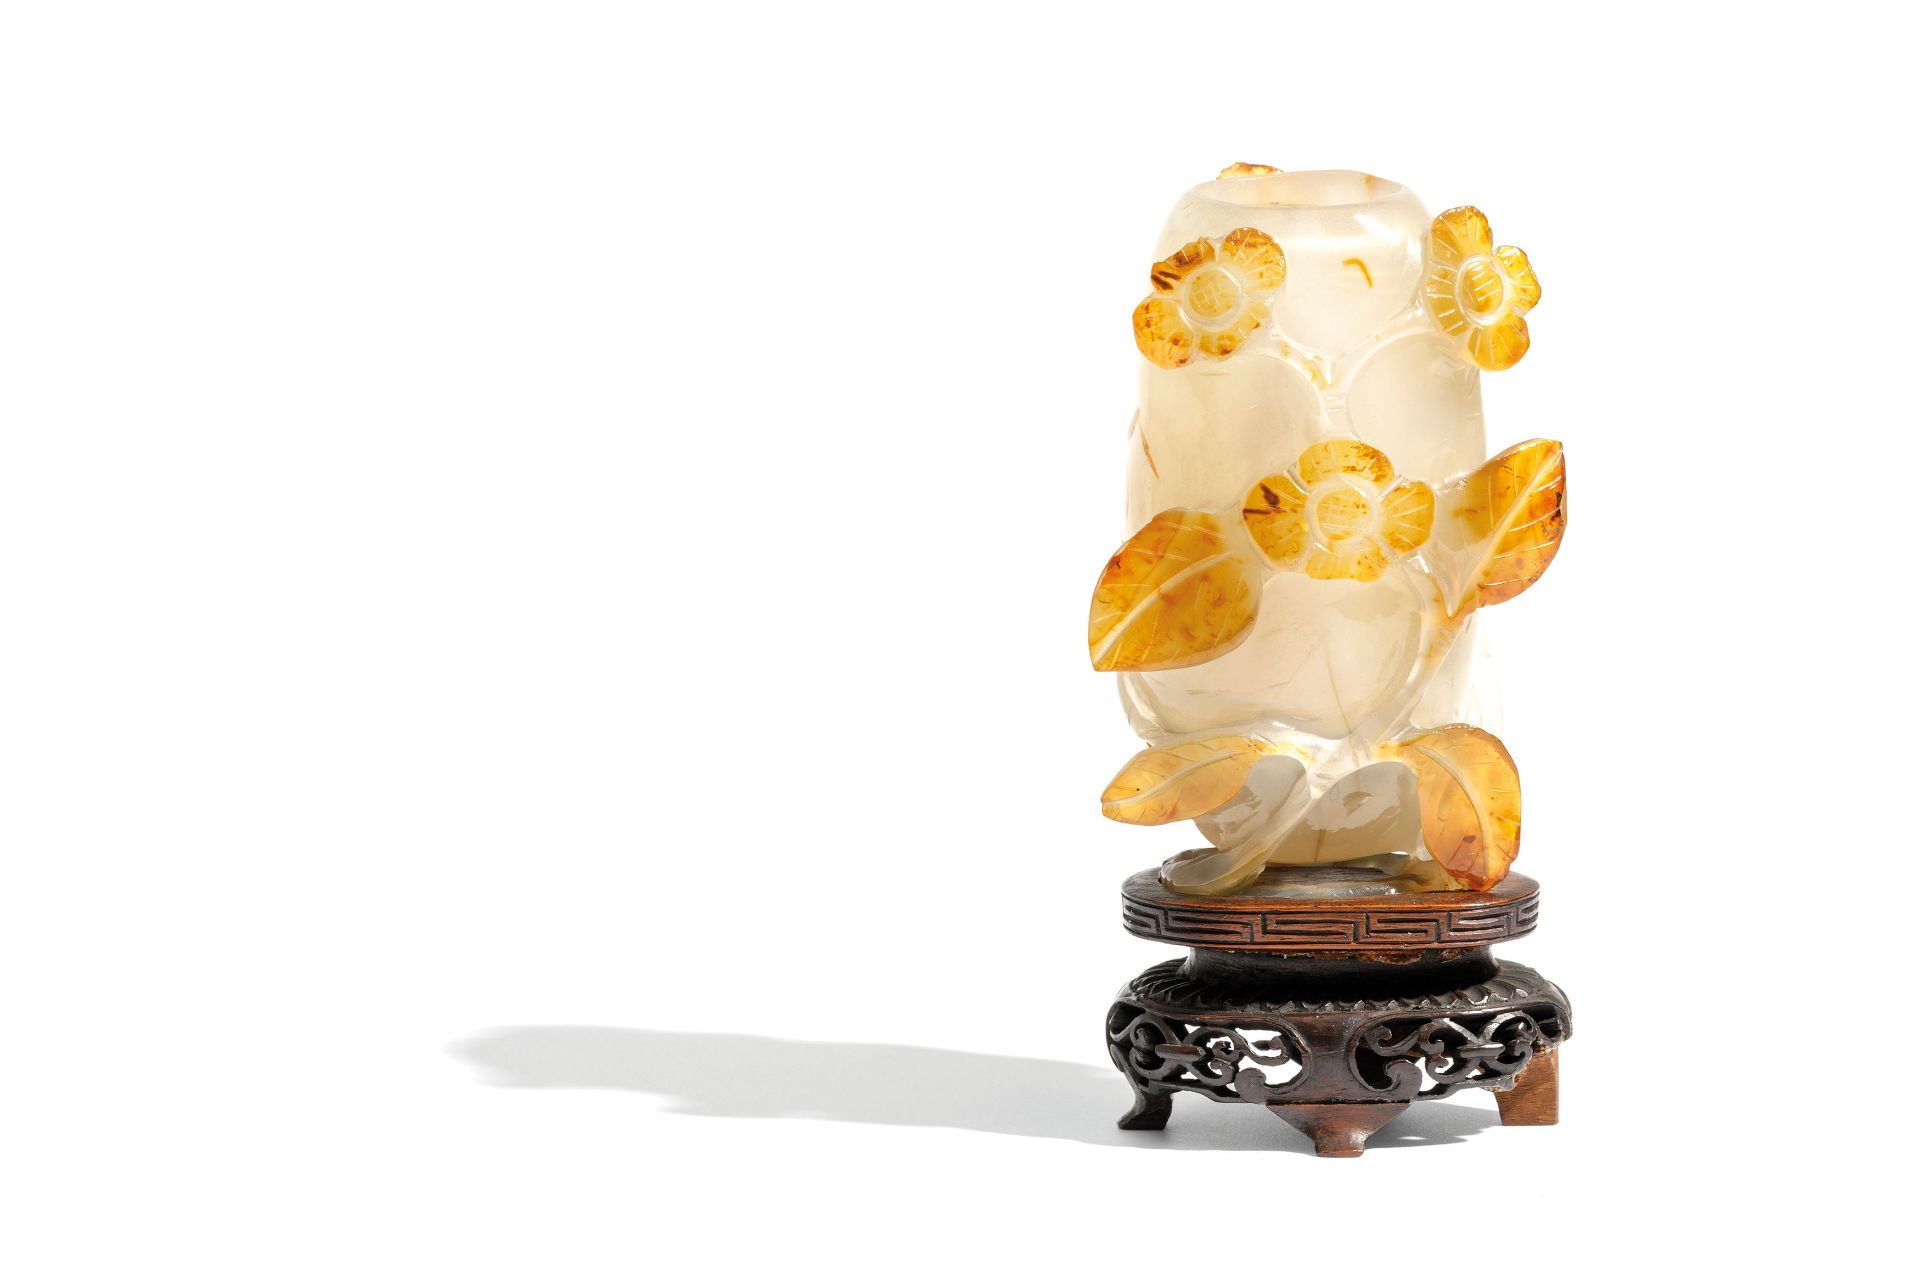 A SMALL AGATE VASE WITH RELIEF FLORAL DECORATION, CHINA, 20TH CENTURY